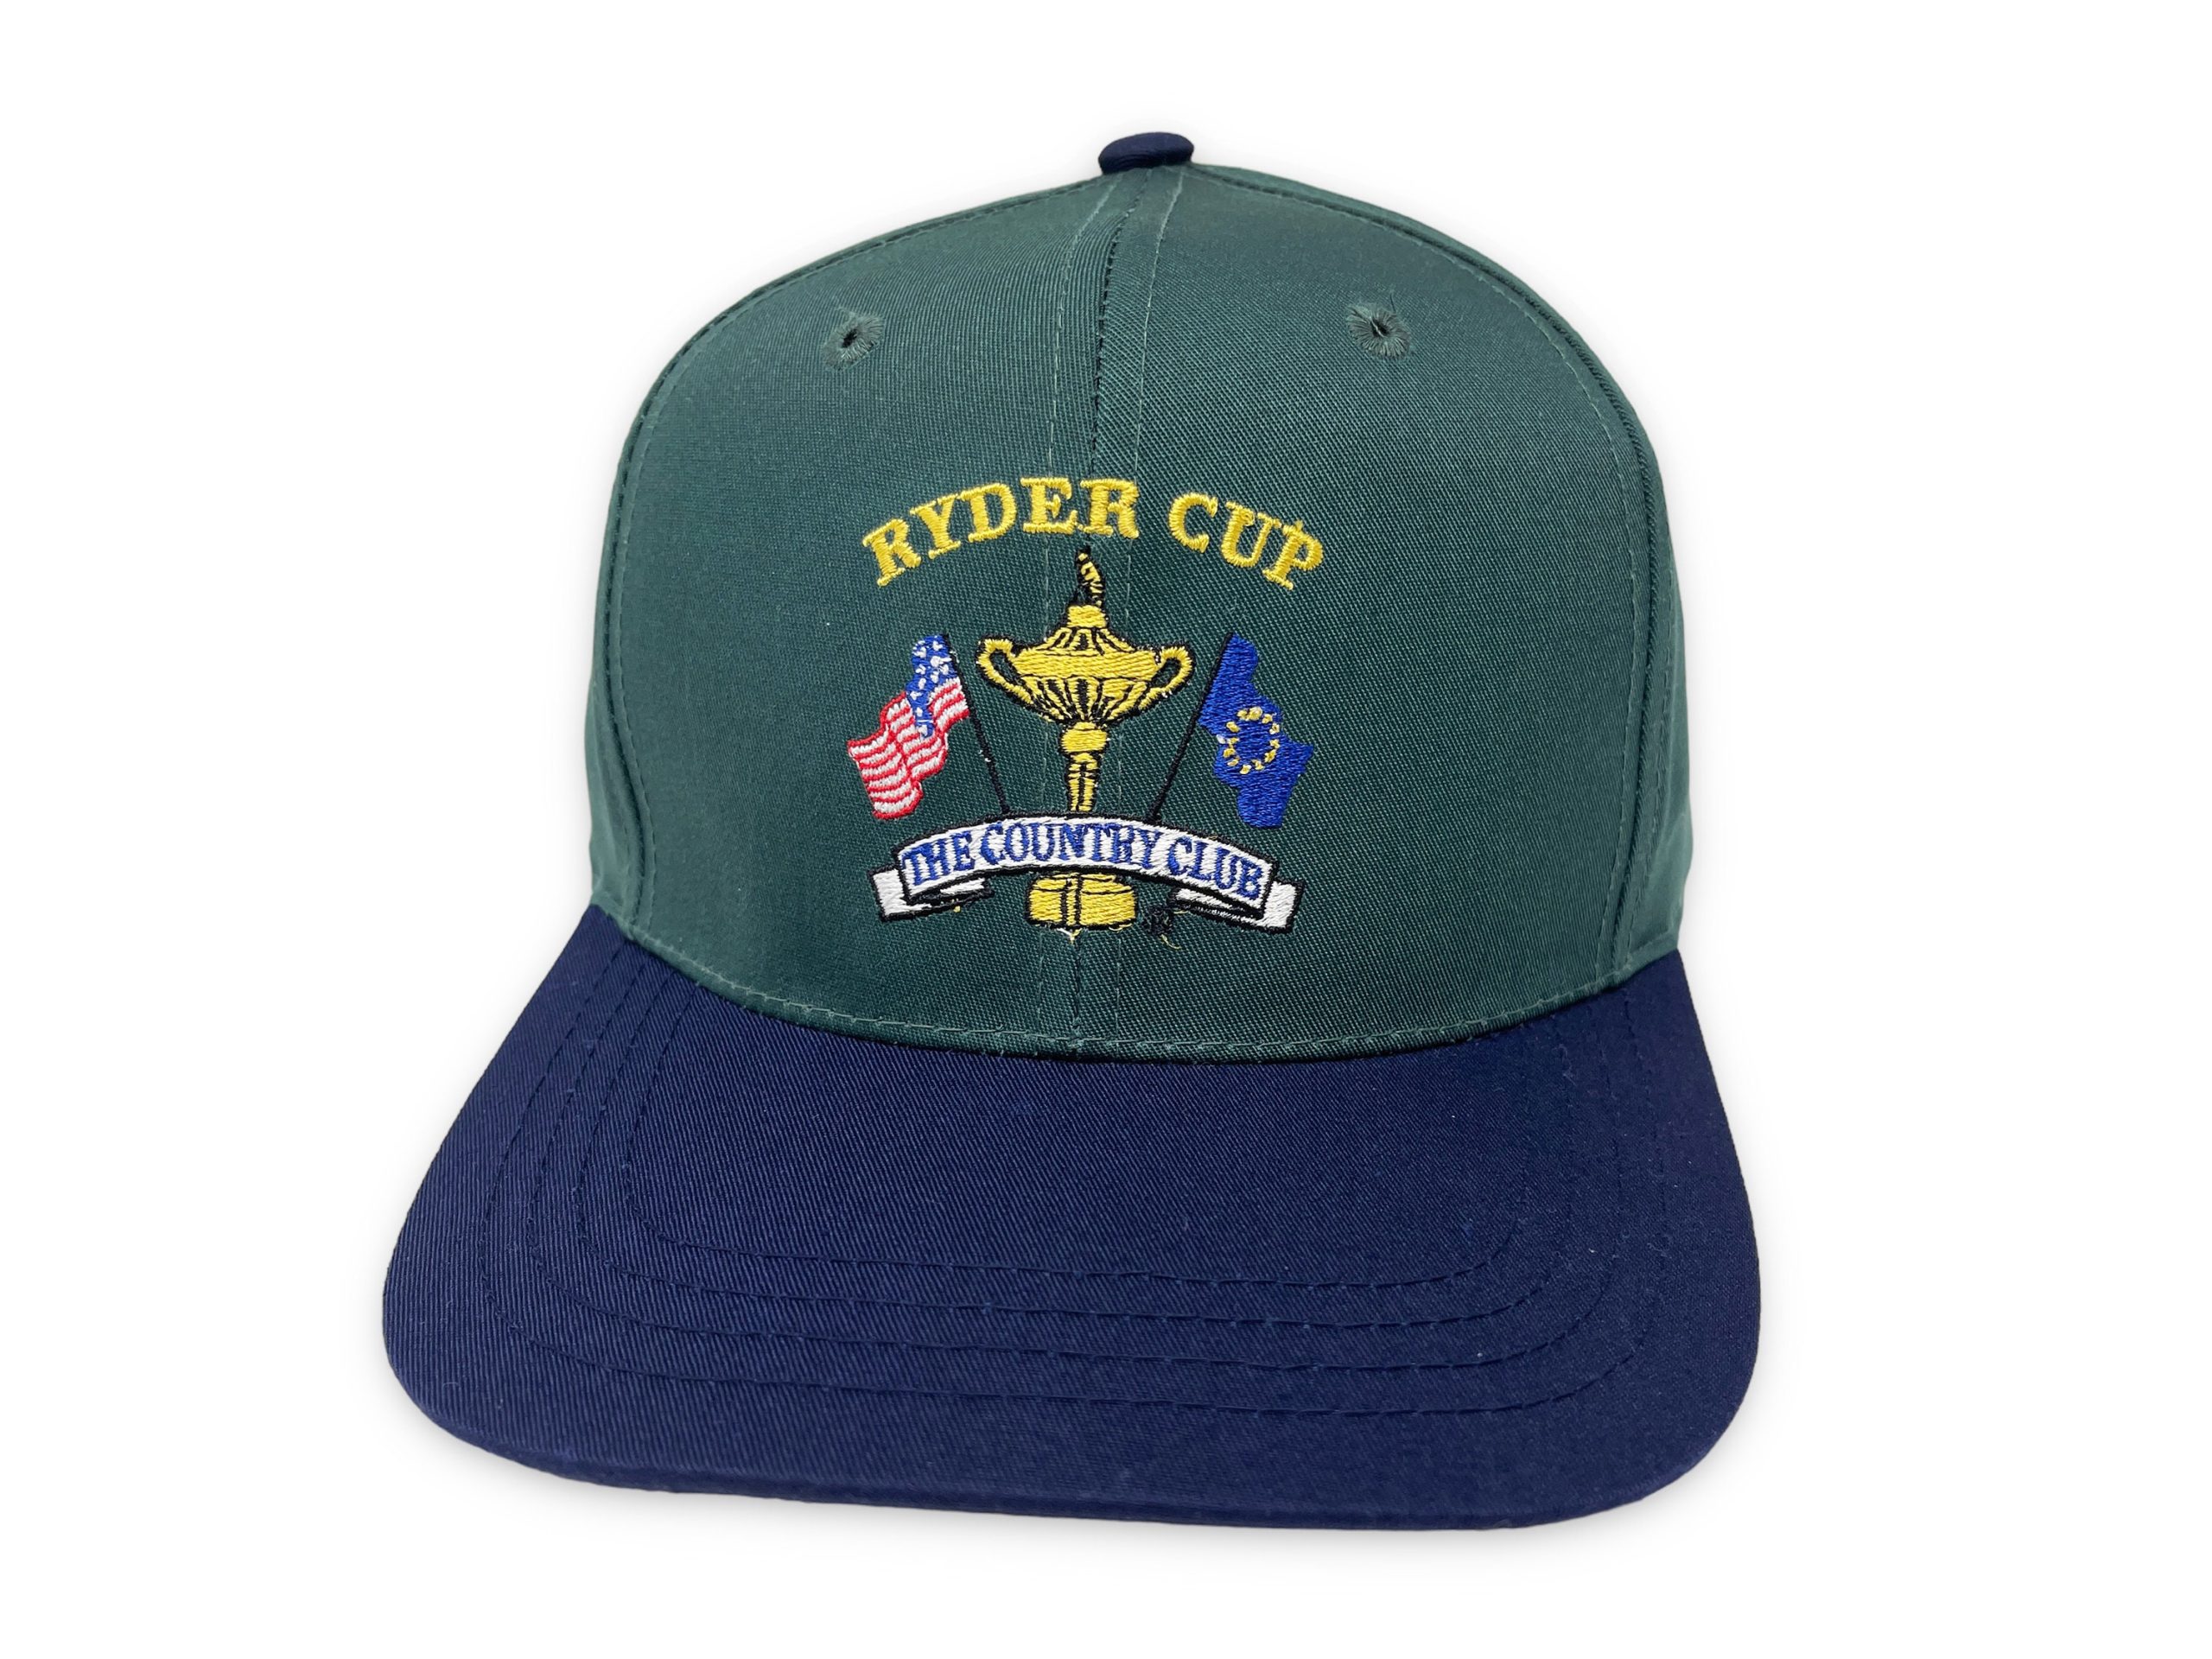 Ryder cup hats